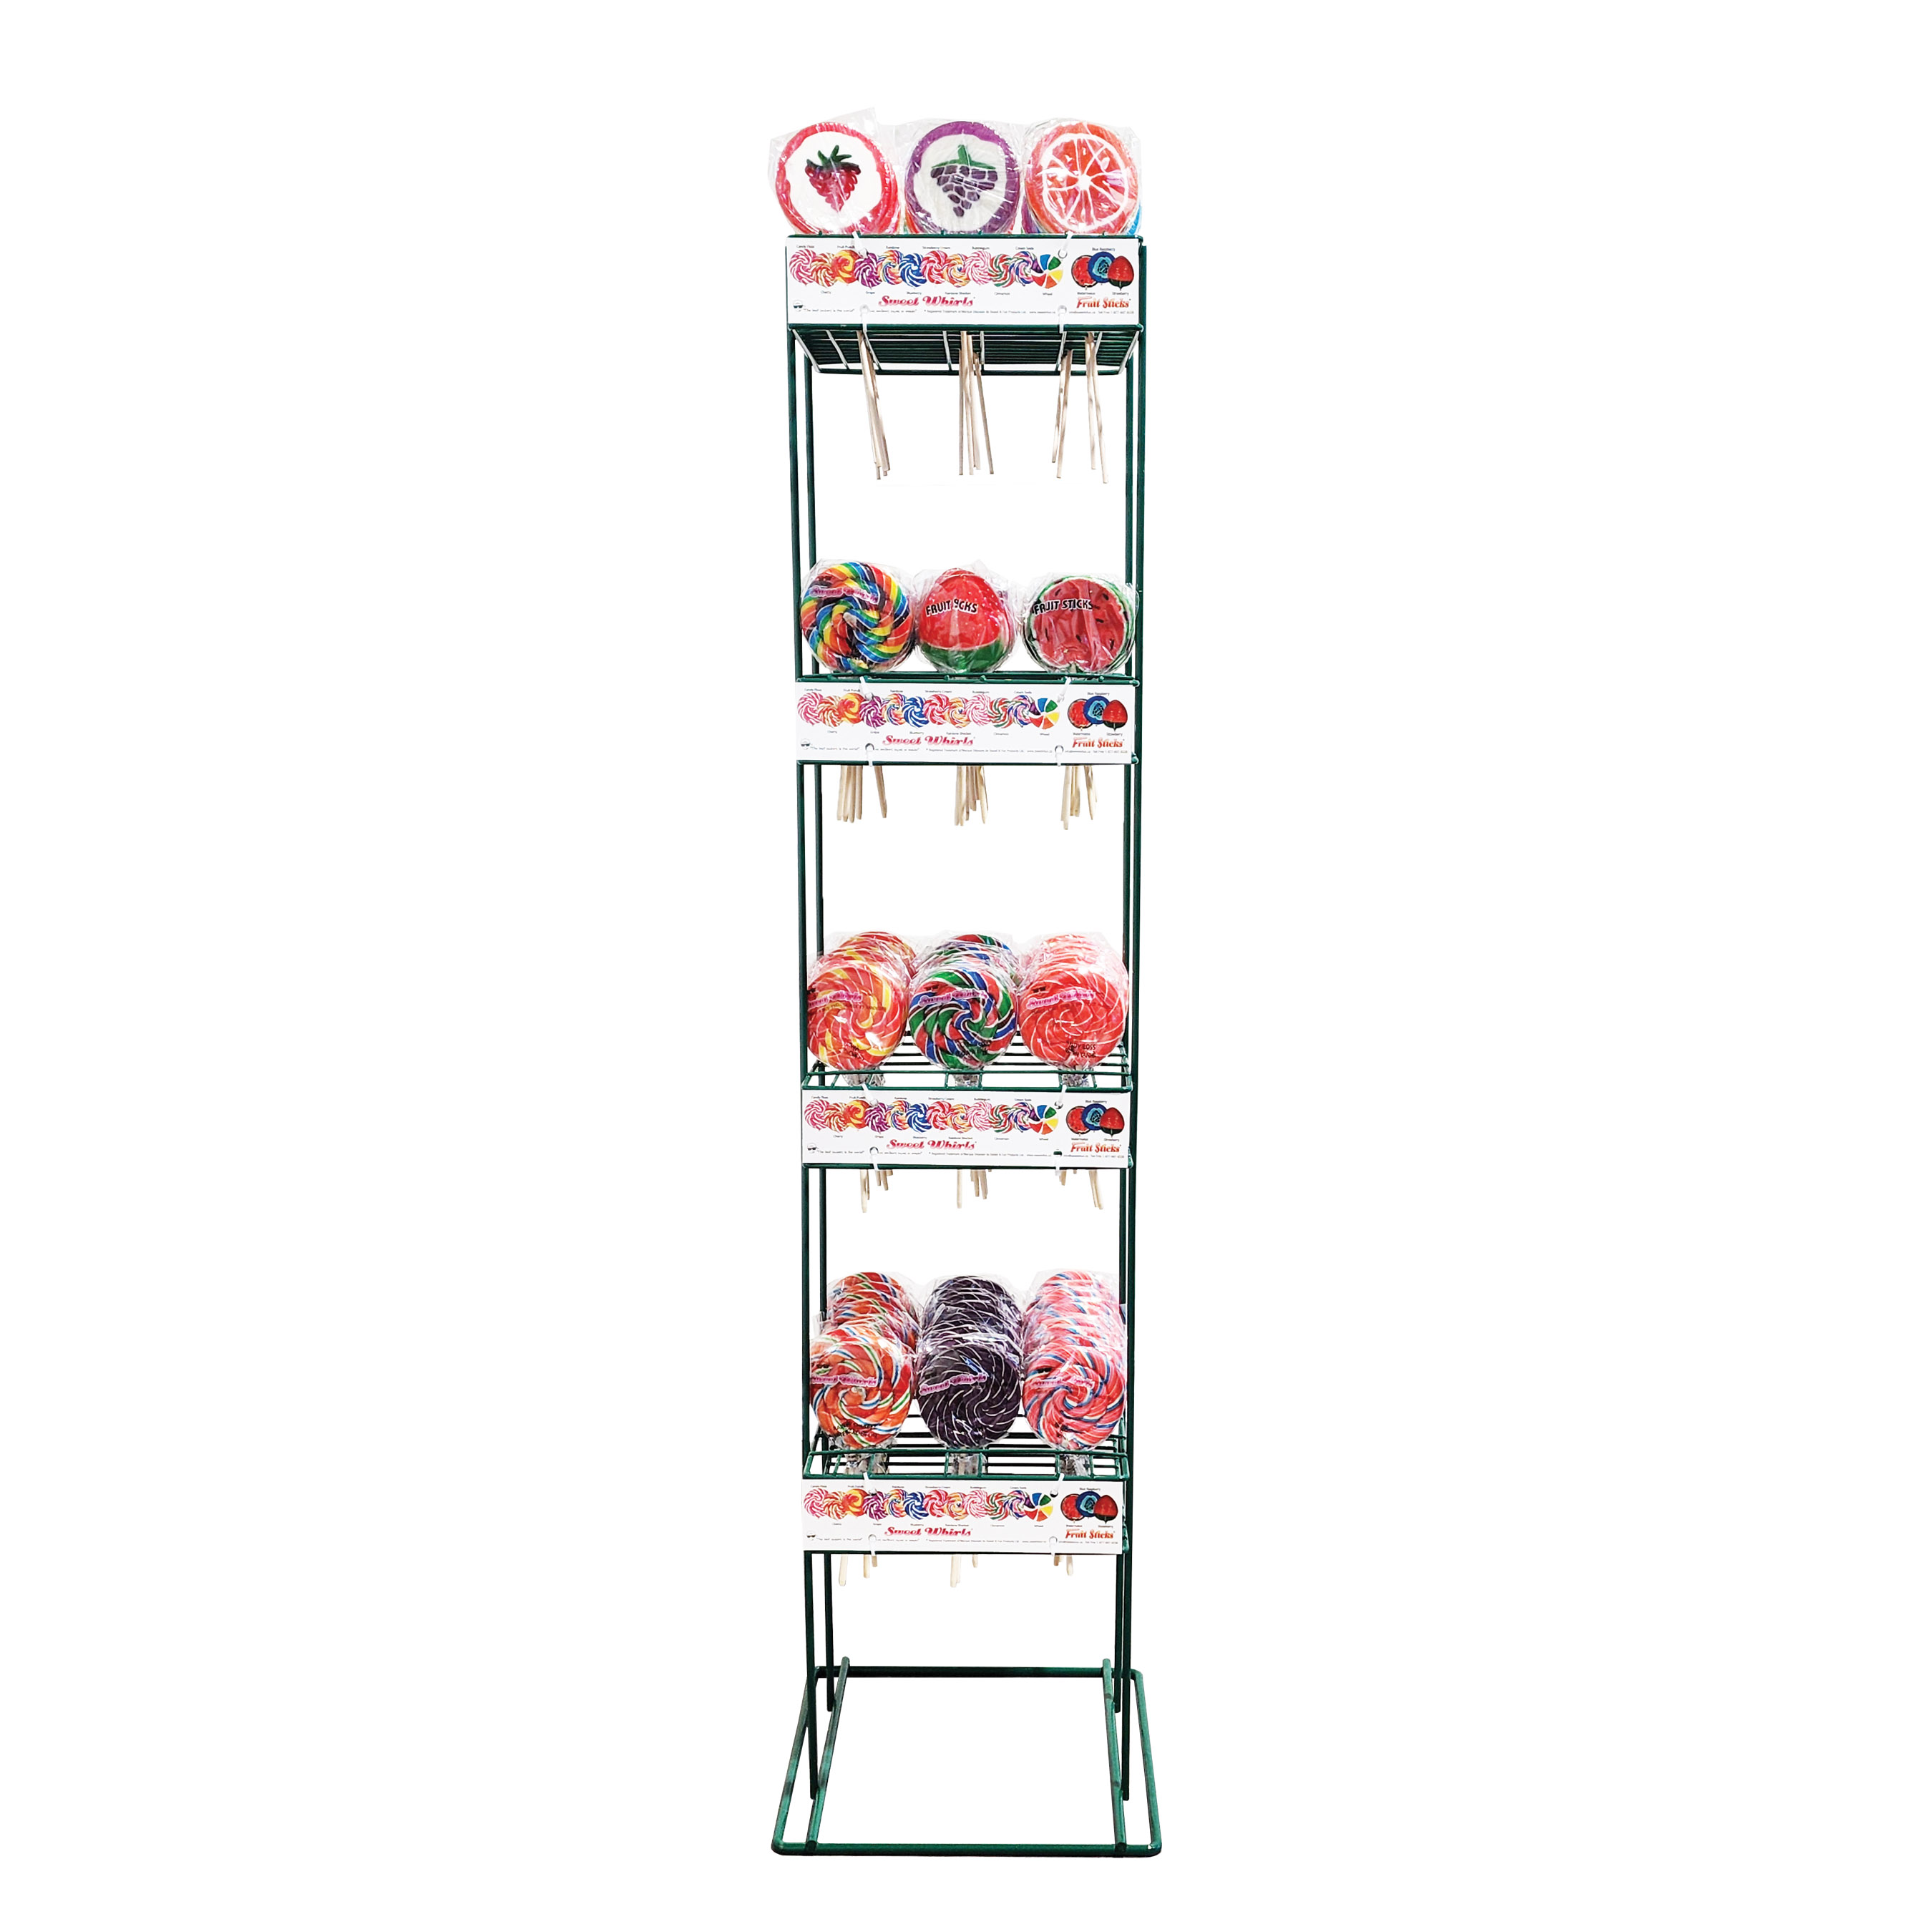 Display methods for your candy. counter top or floor standing. six to choose from